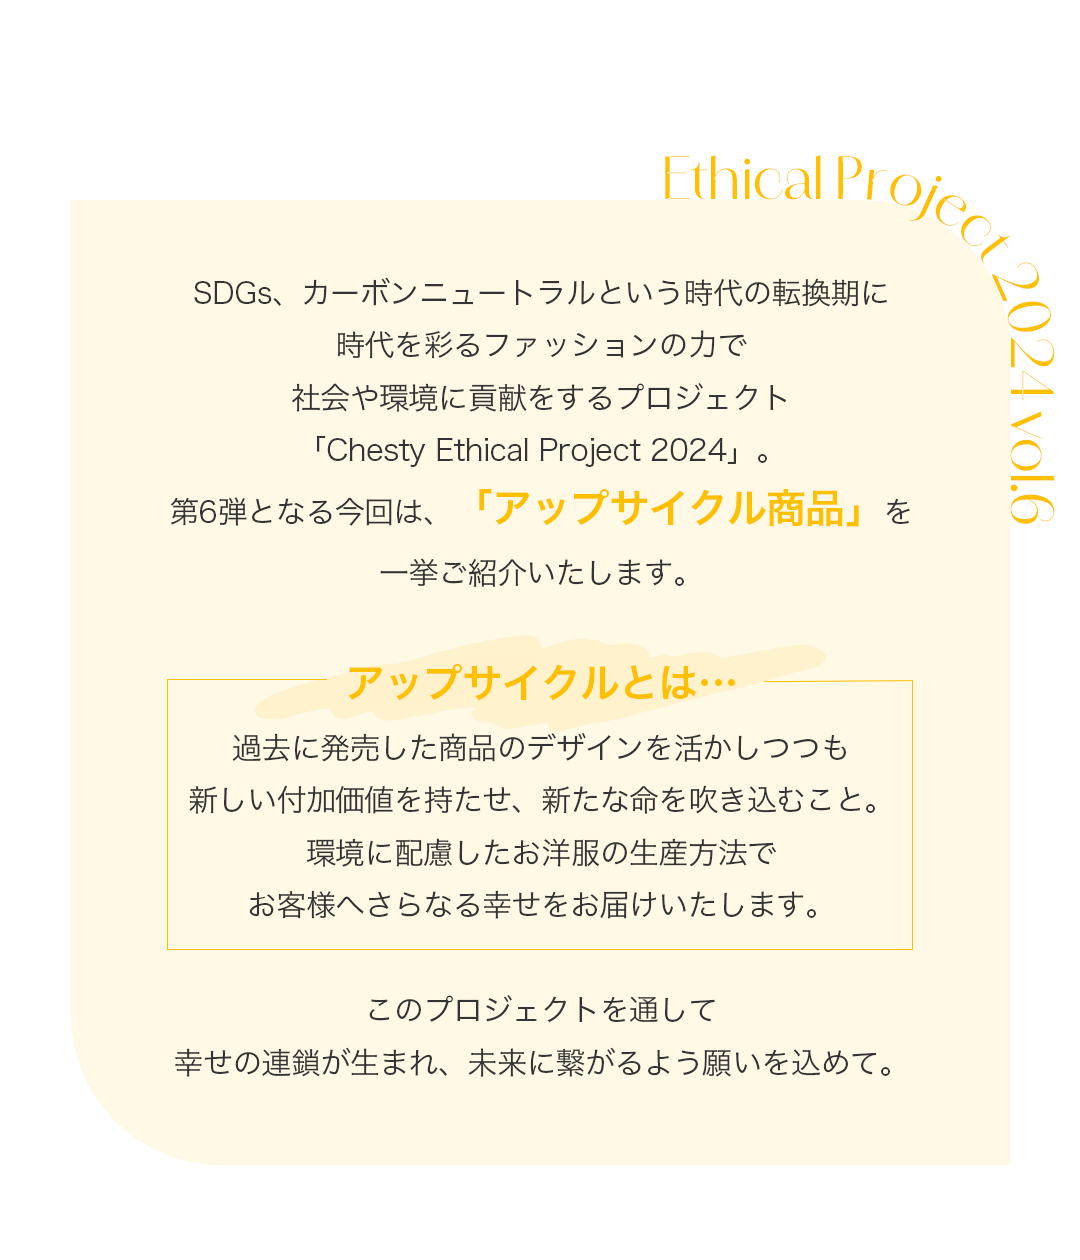 Chesty Ethical Project 2024とは